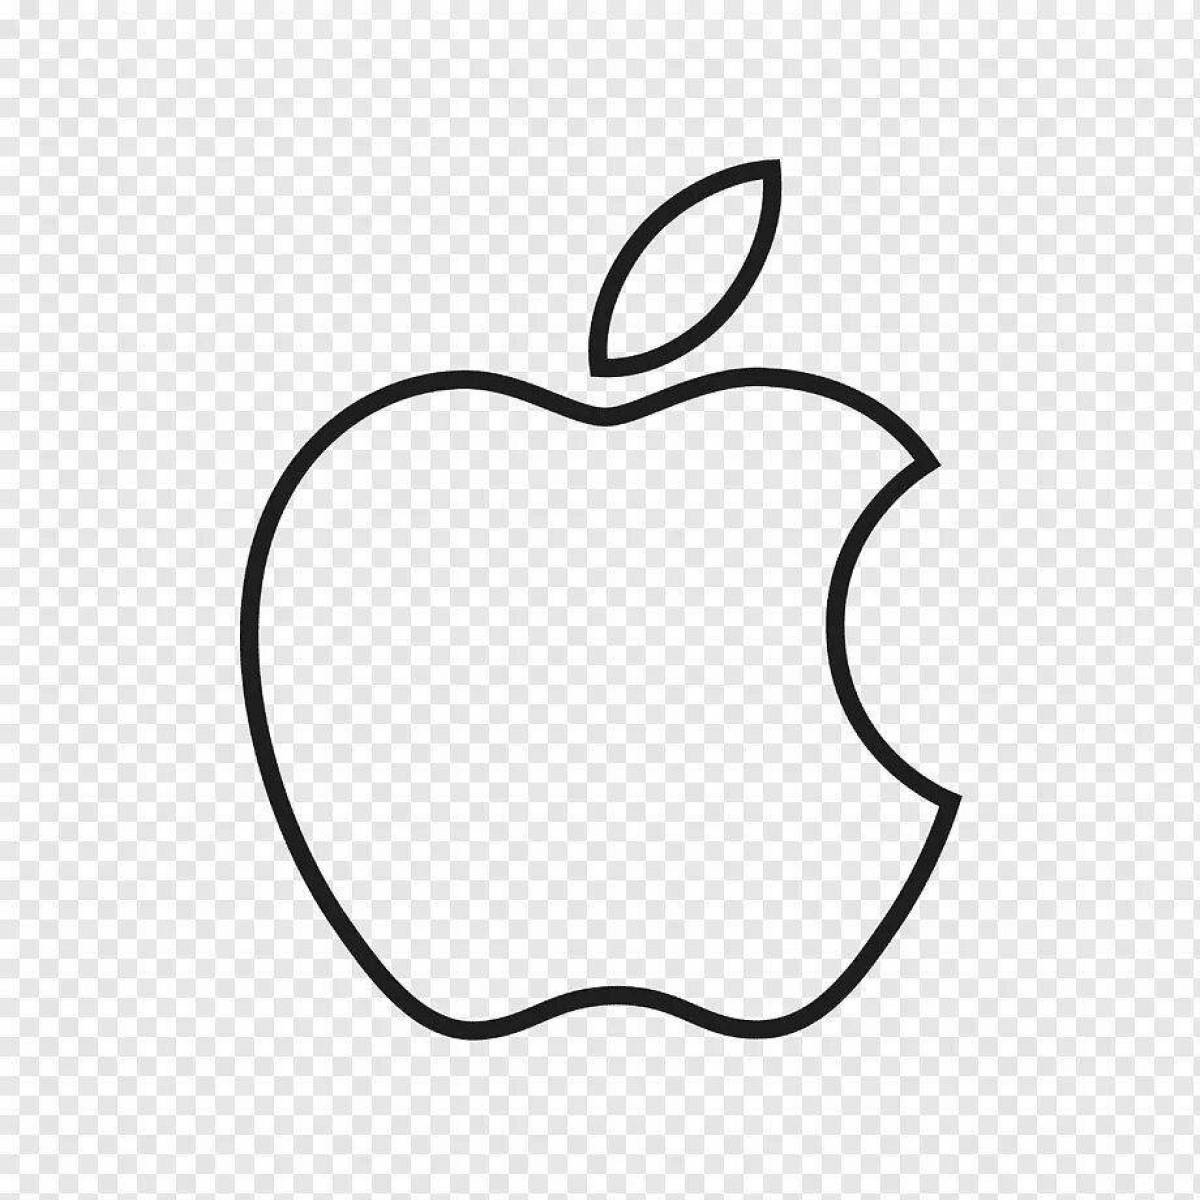 Cute apple icon coloring page